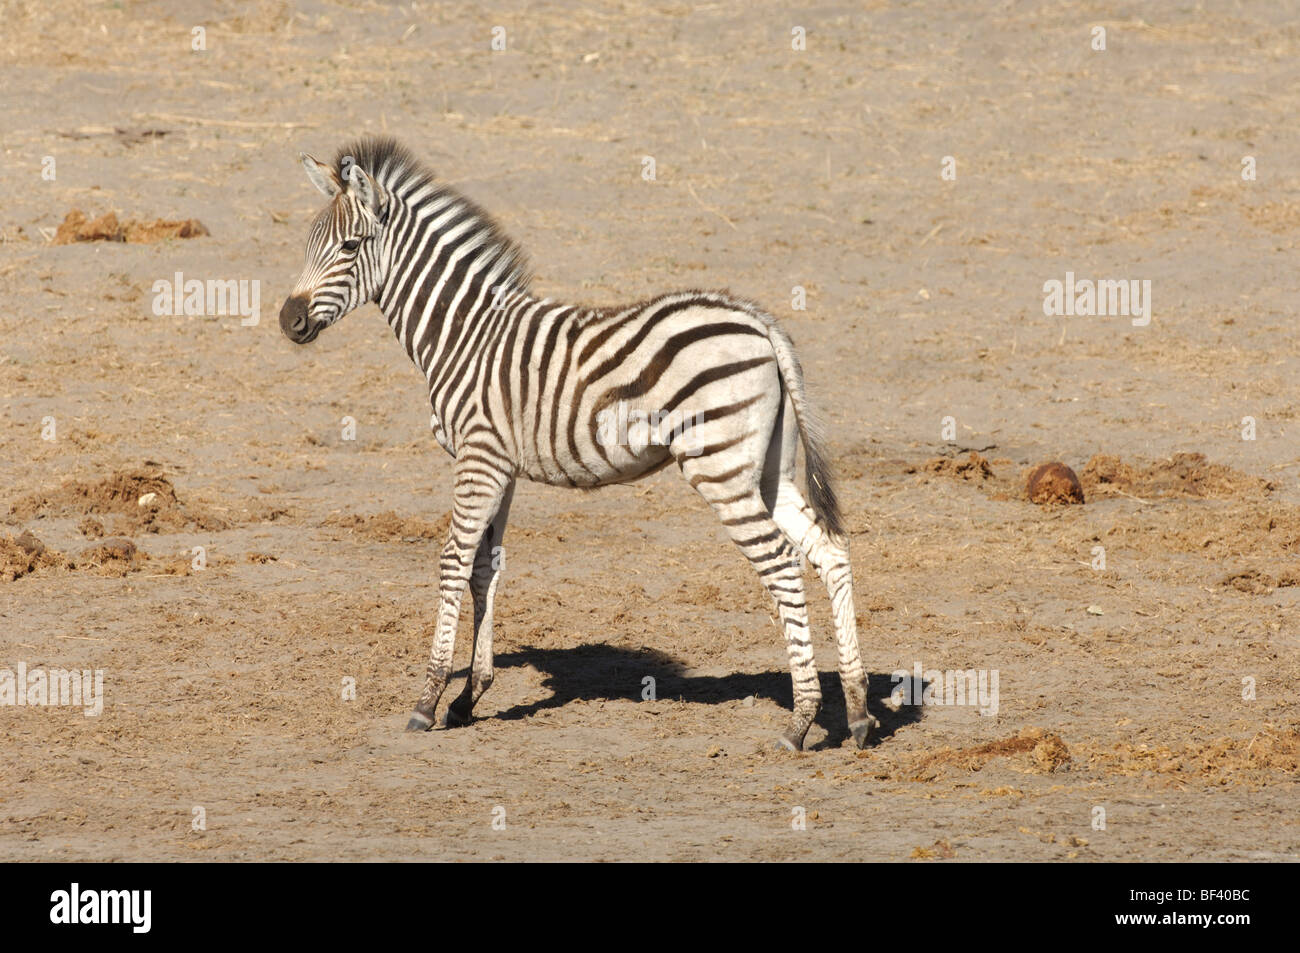 Stock photo of a zebra foal standing in the dirt, Linyanti Reserve, Botswana. Stock Photo